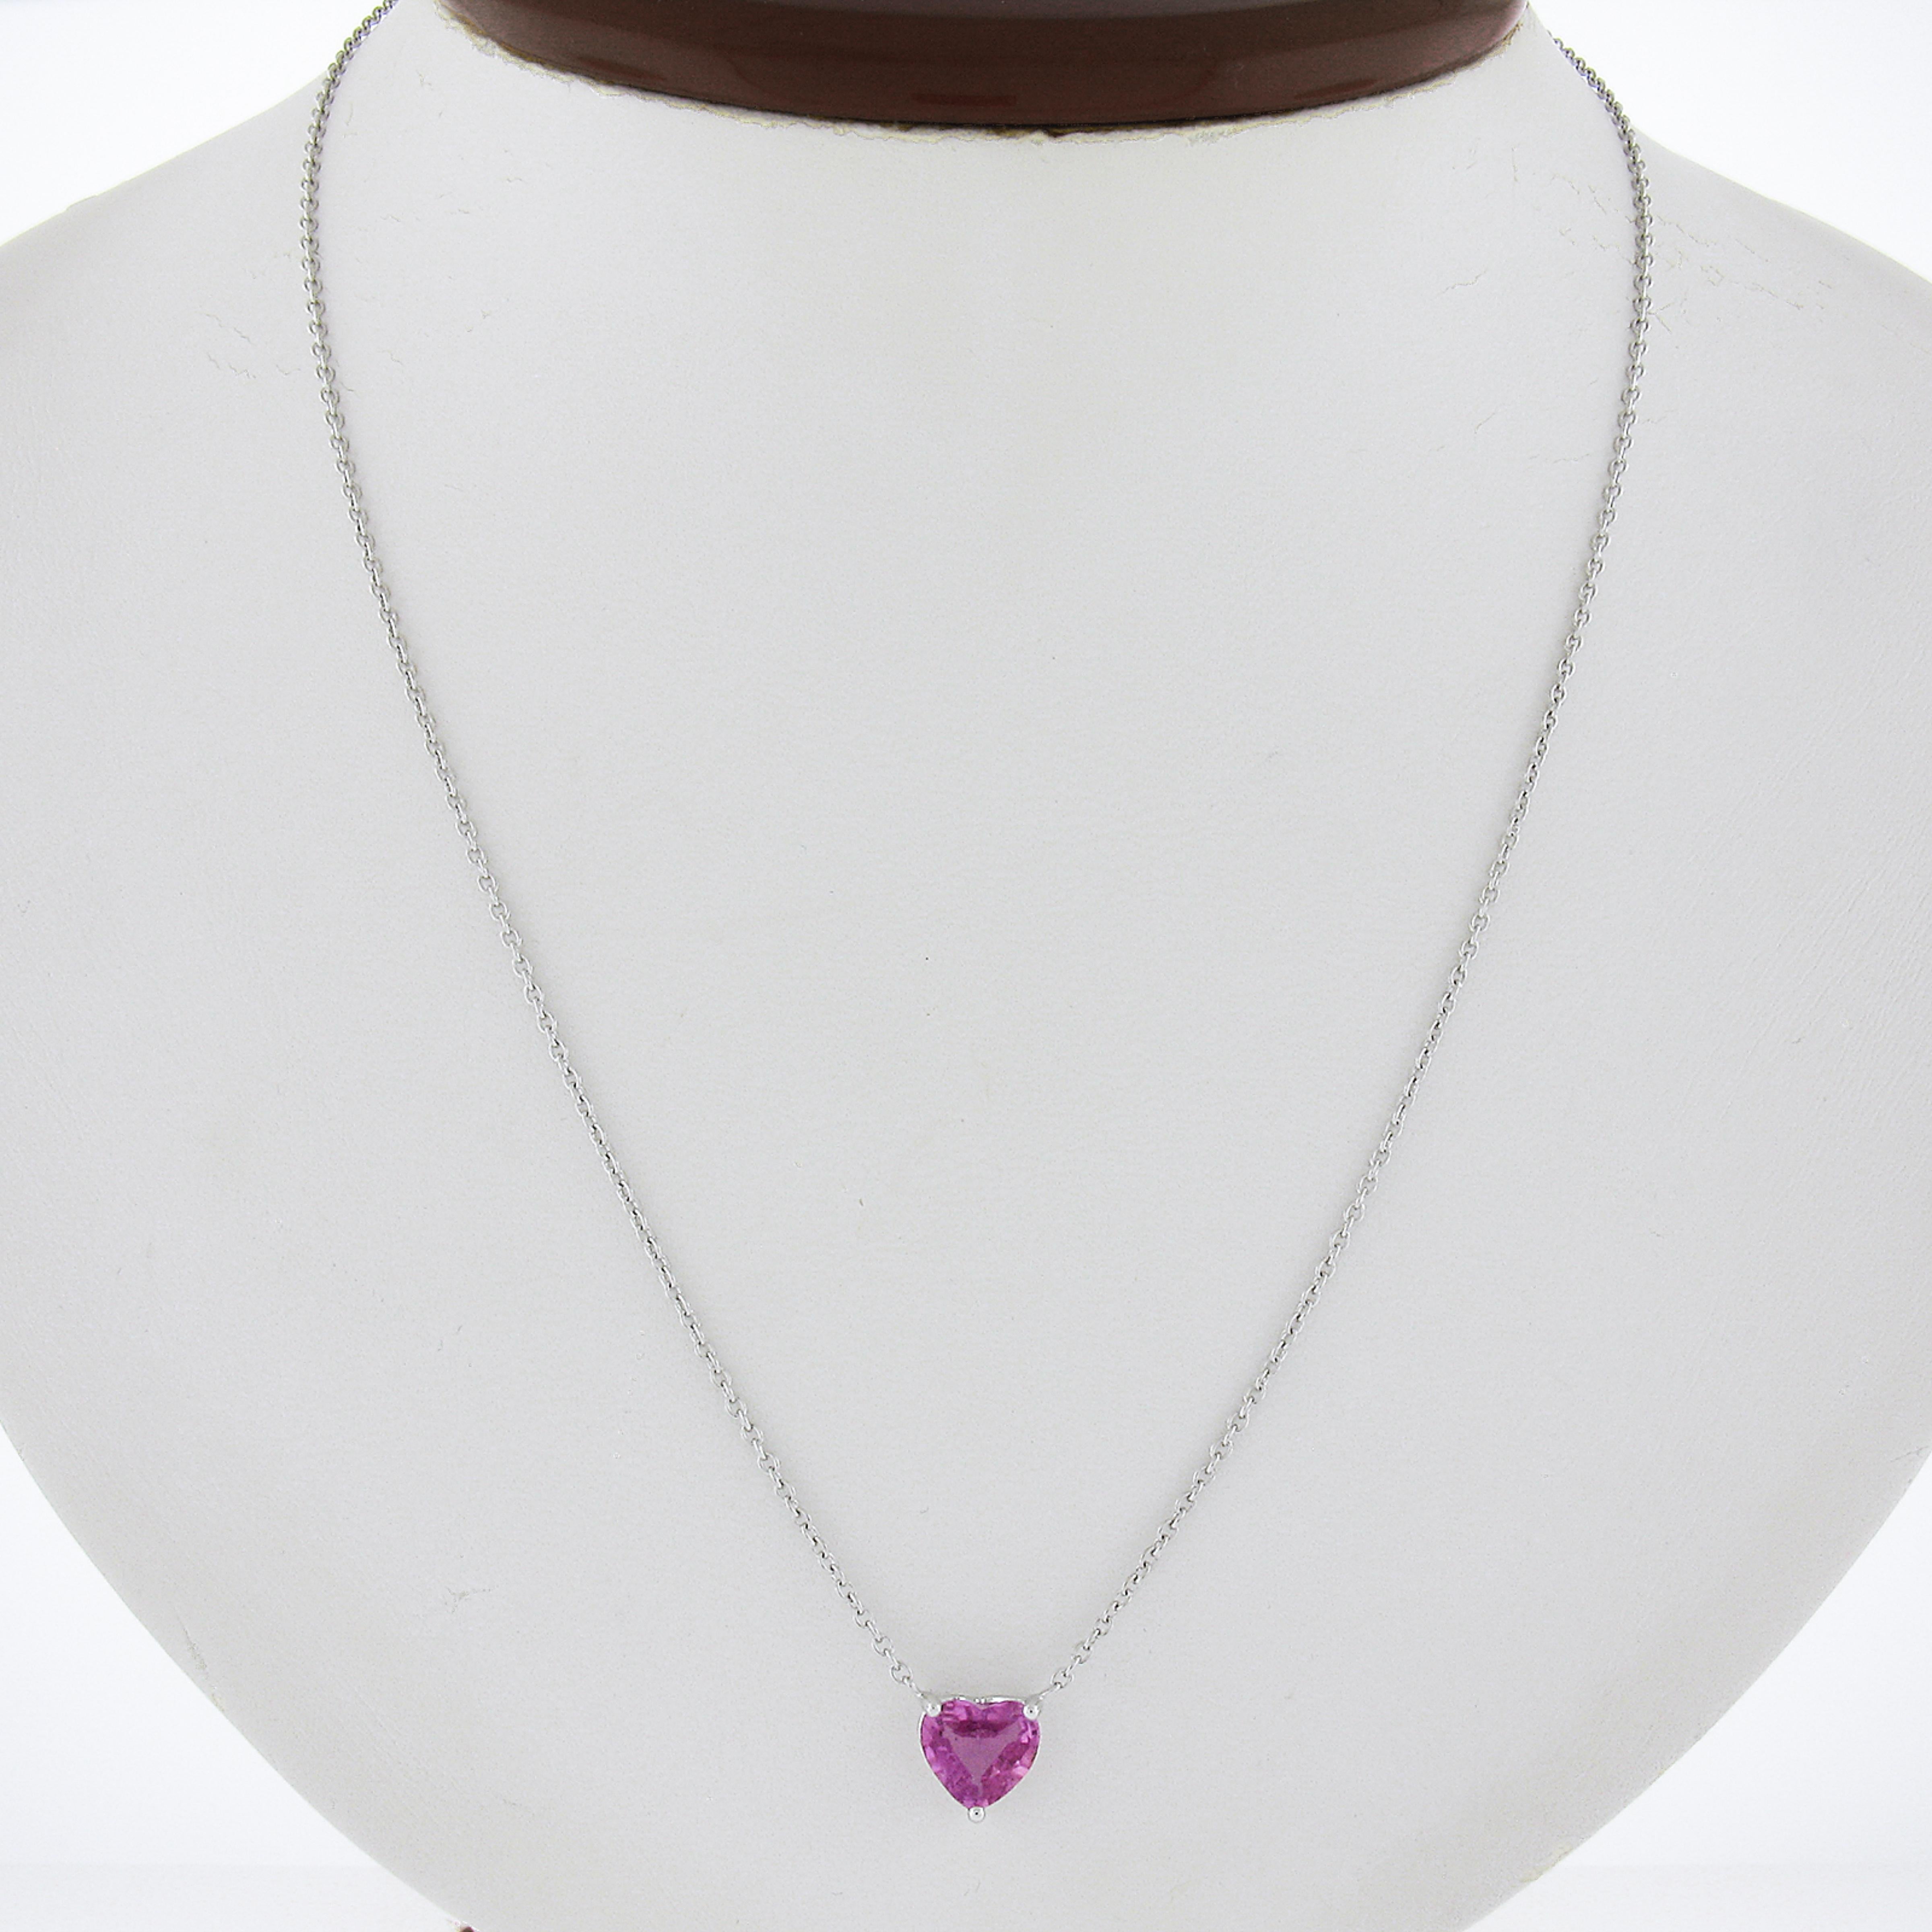 --Stone(s):--
(1) Natural Genuine Sapphire - Heart Cut - Prong Set -  Purplish Pink Color - *See Certification Details Below*
Total Carat Weight:	1.54 (exact, certified)

Material: Solid Platinum
Weight: 4.72 Grams
Chain Type: Cable Link
Chain